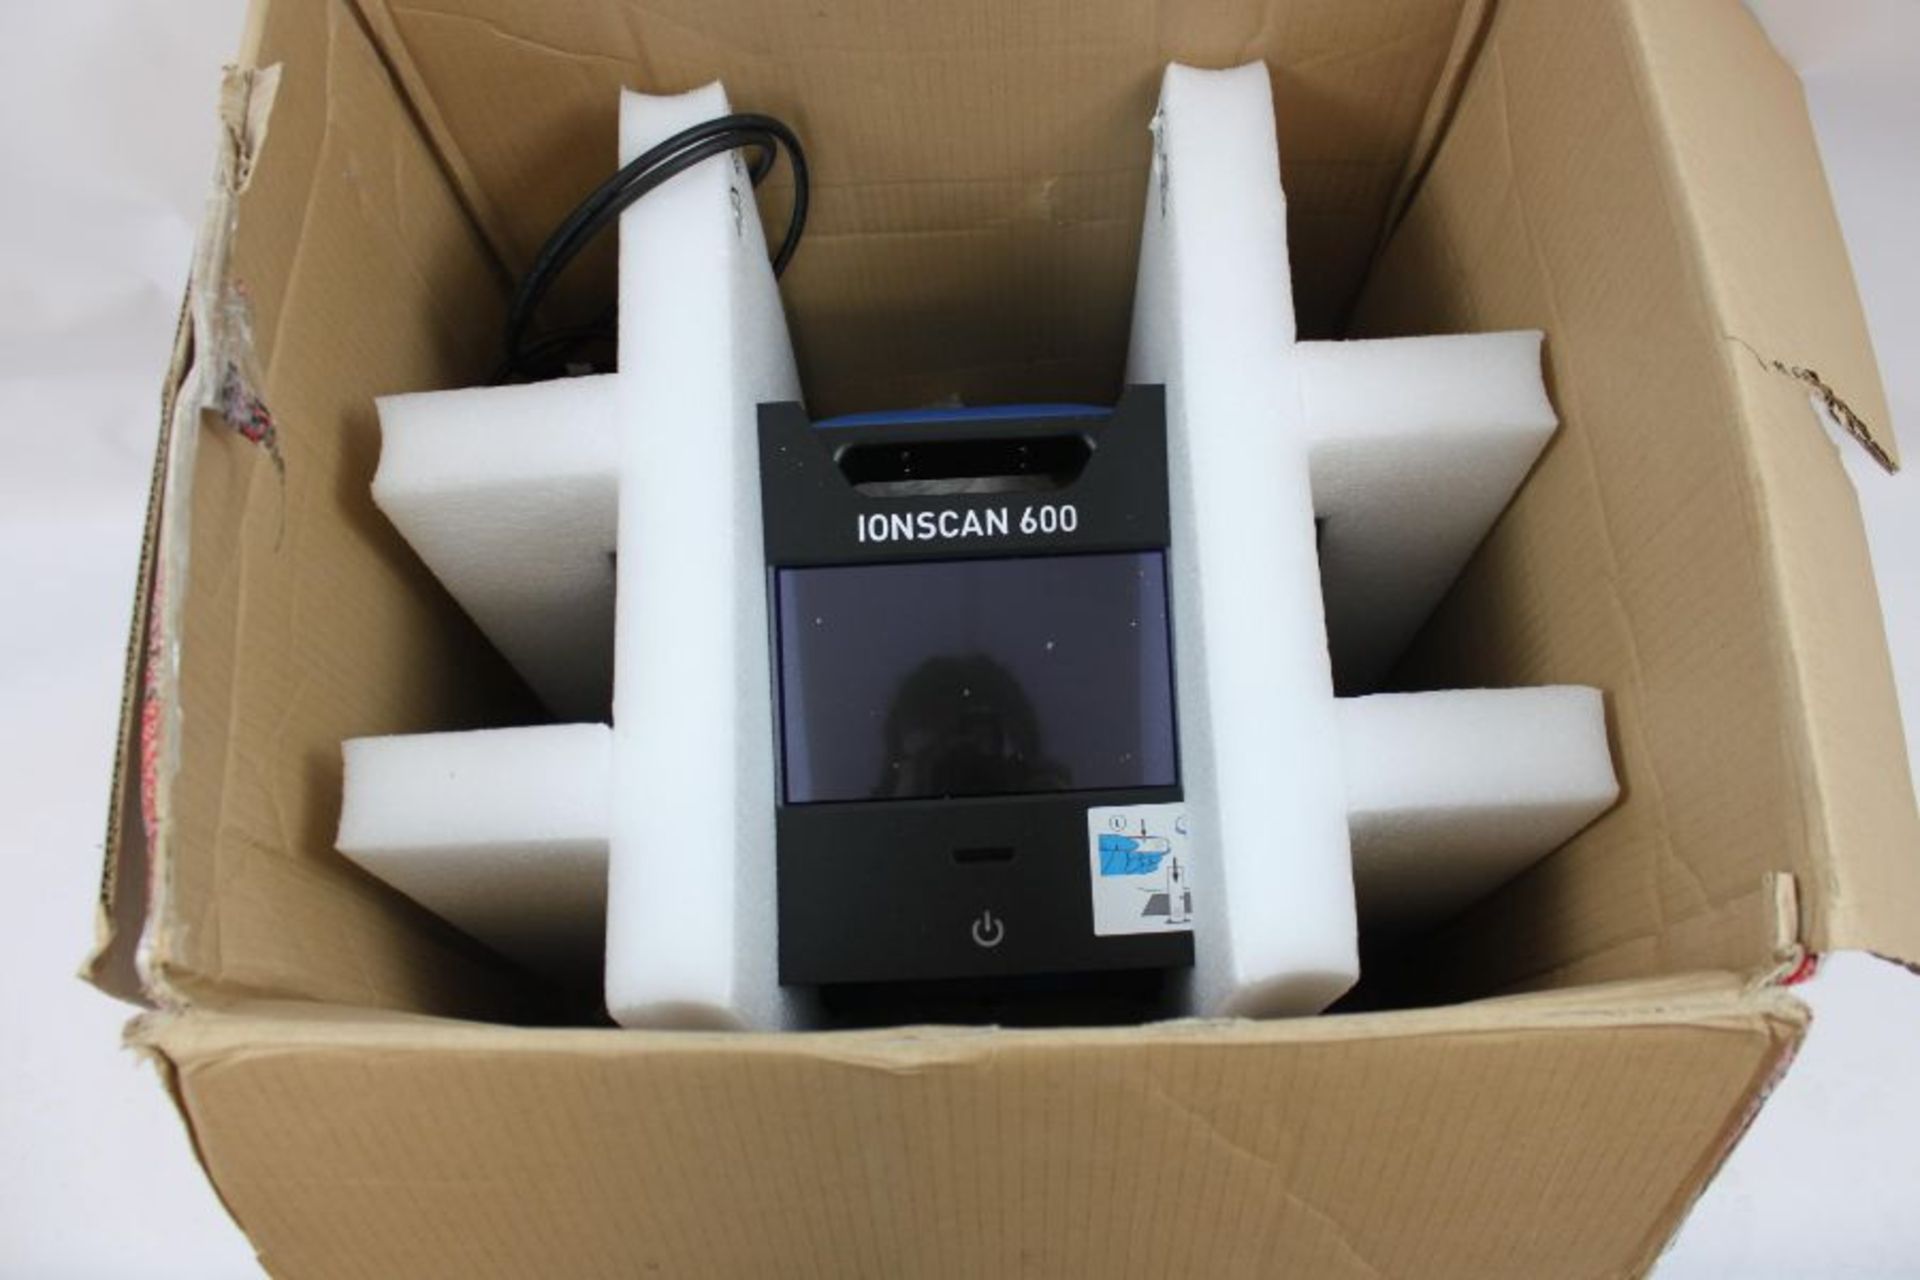 IONSCAN 600 Portable Explosives and Narcotics Trace Machine